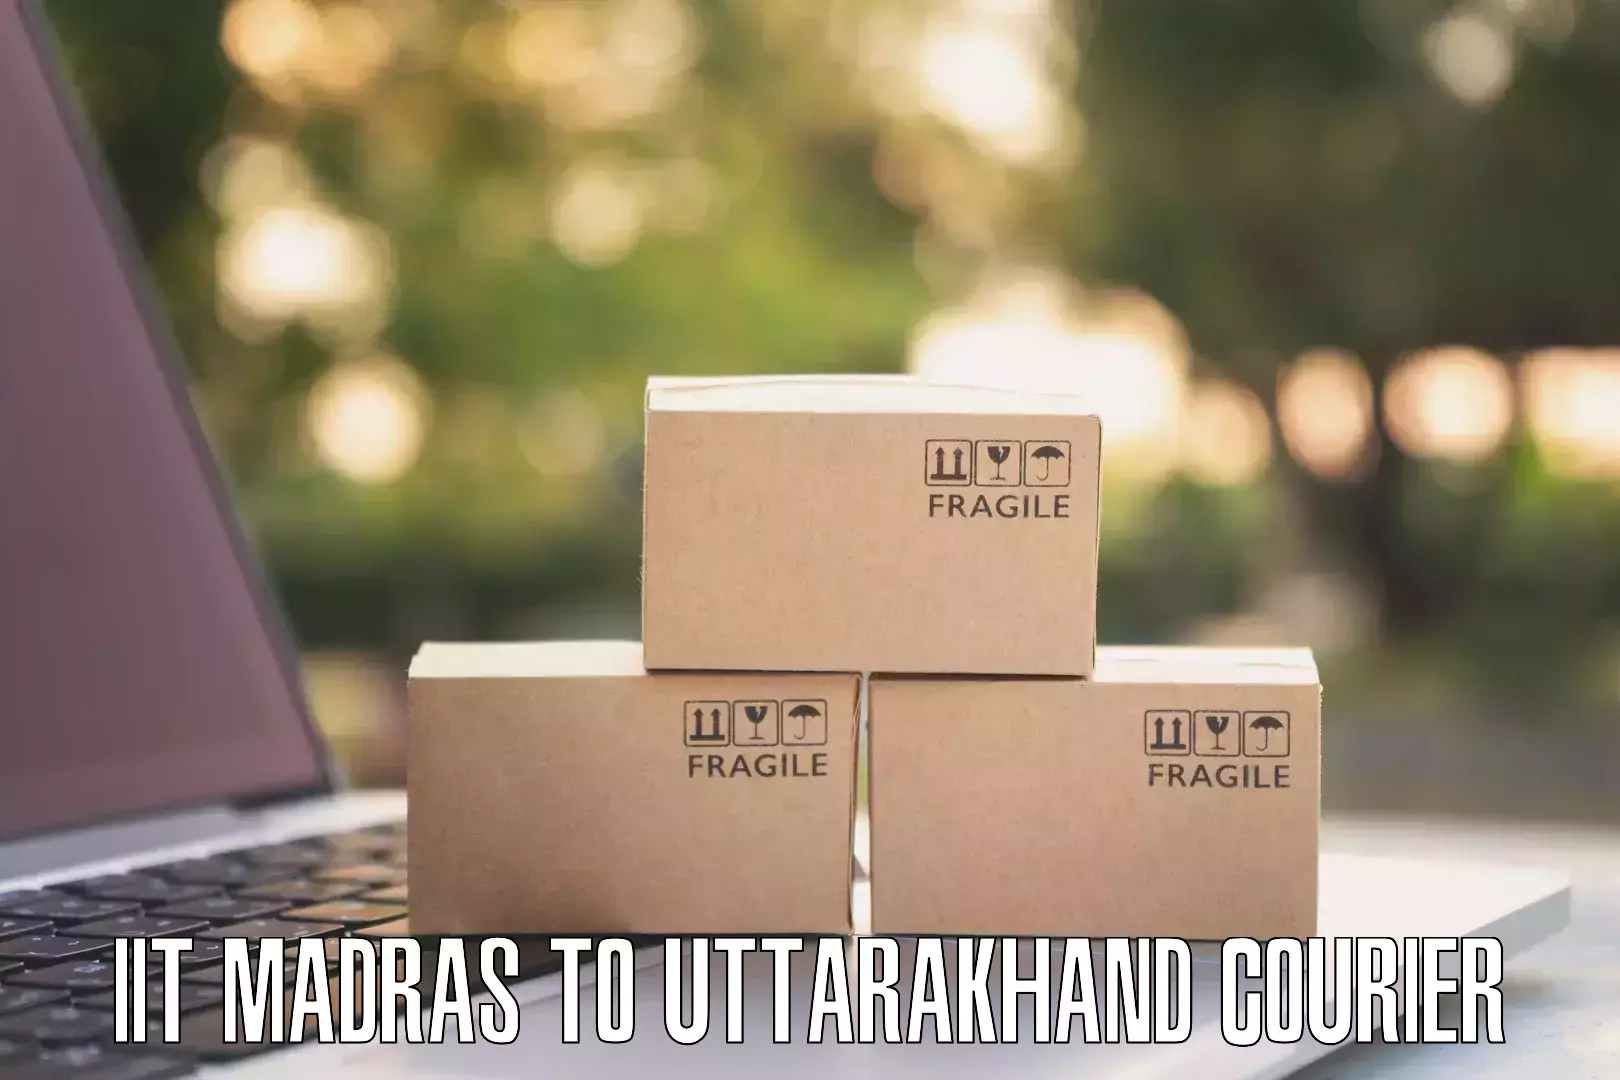 Courier service comparison in IIT Madras to Bhagwanpur